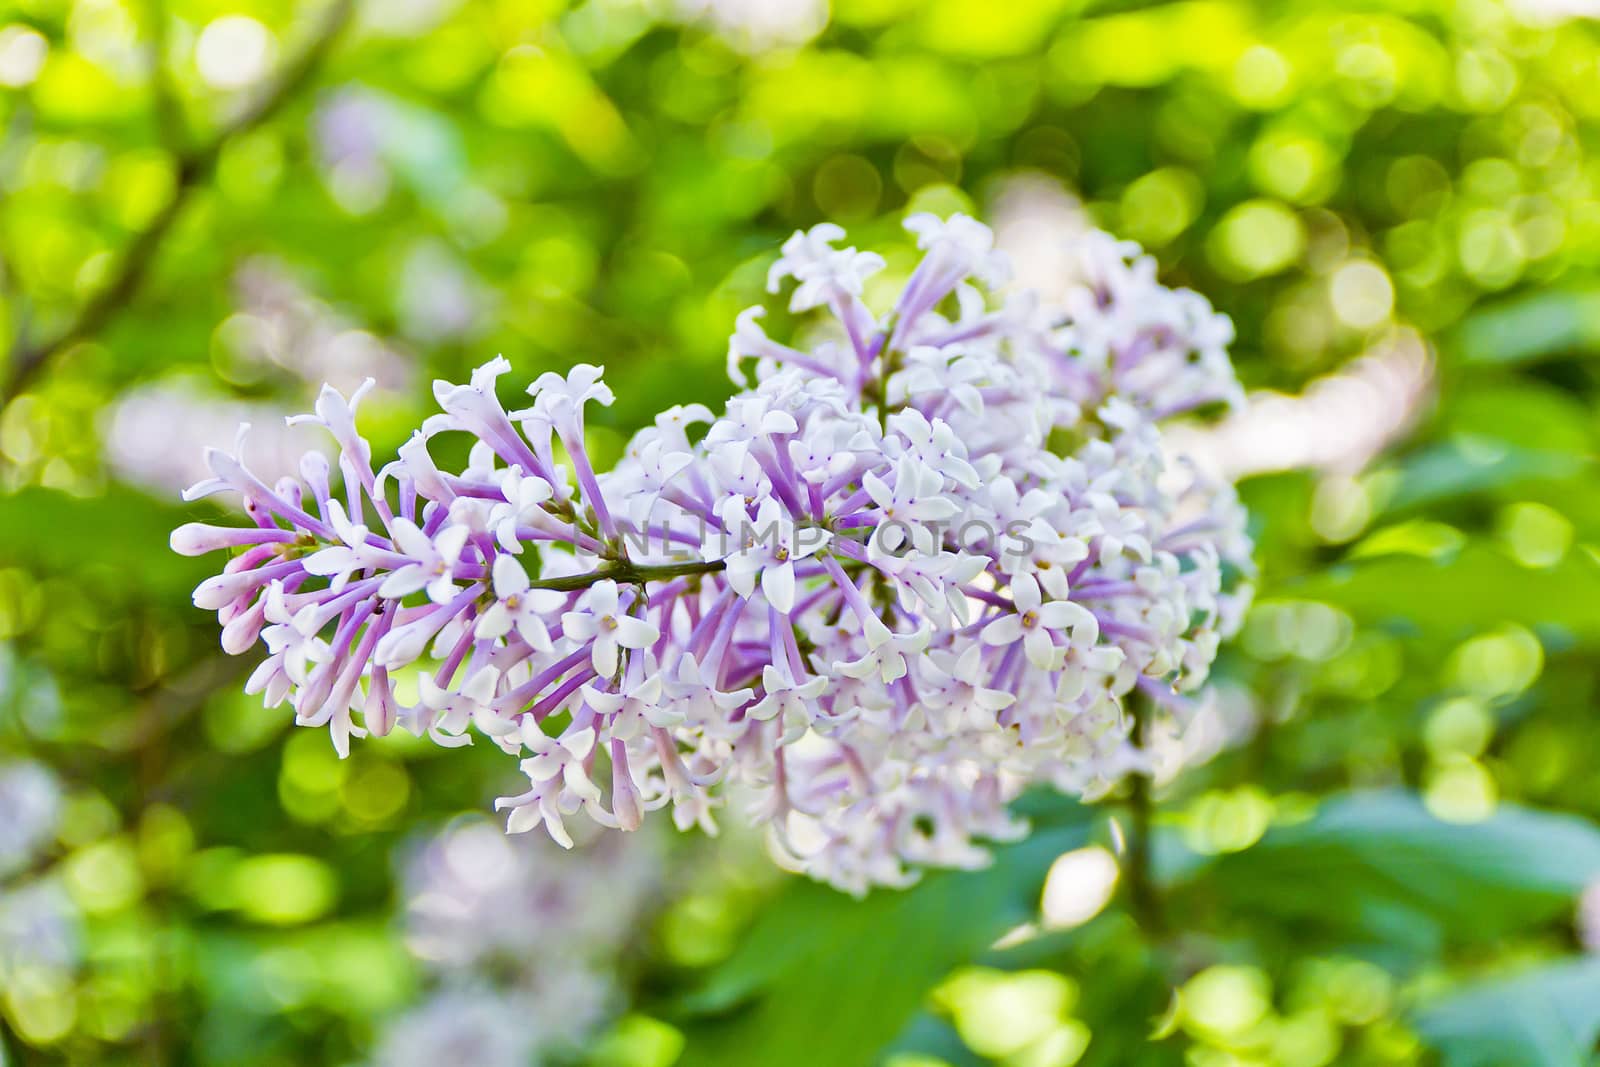 One inflorescence pale purple lilac by Julialine